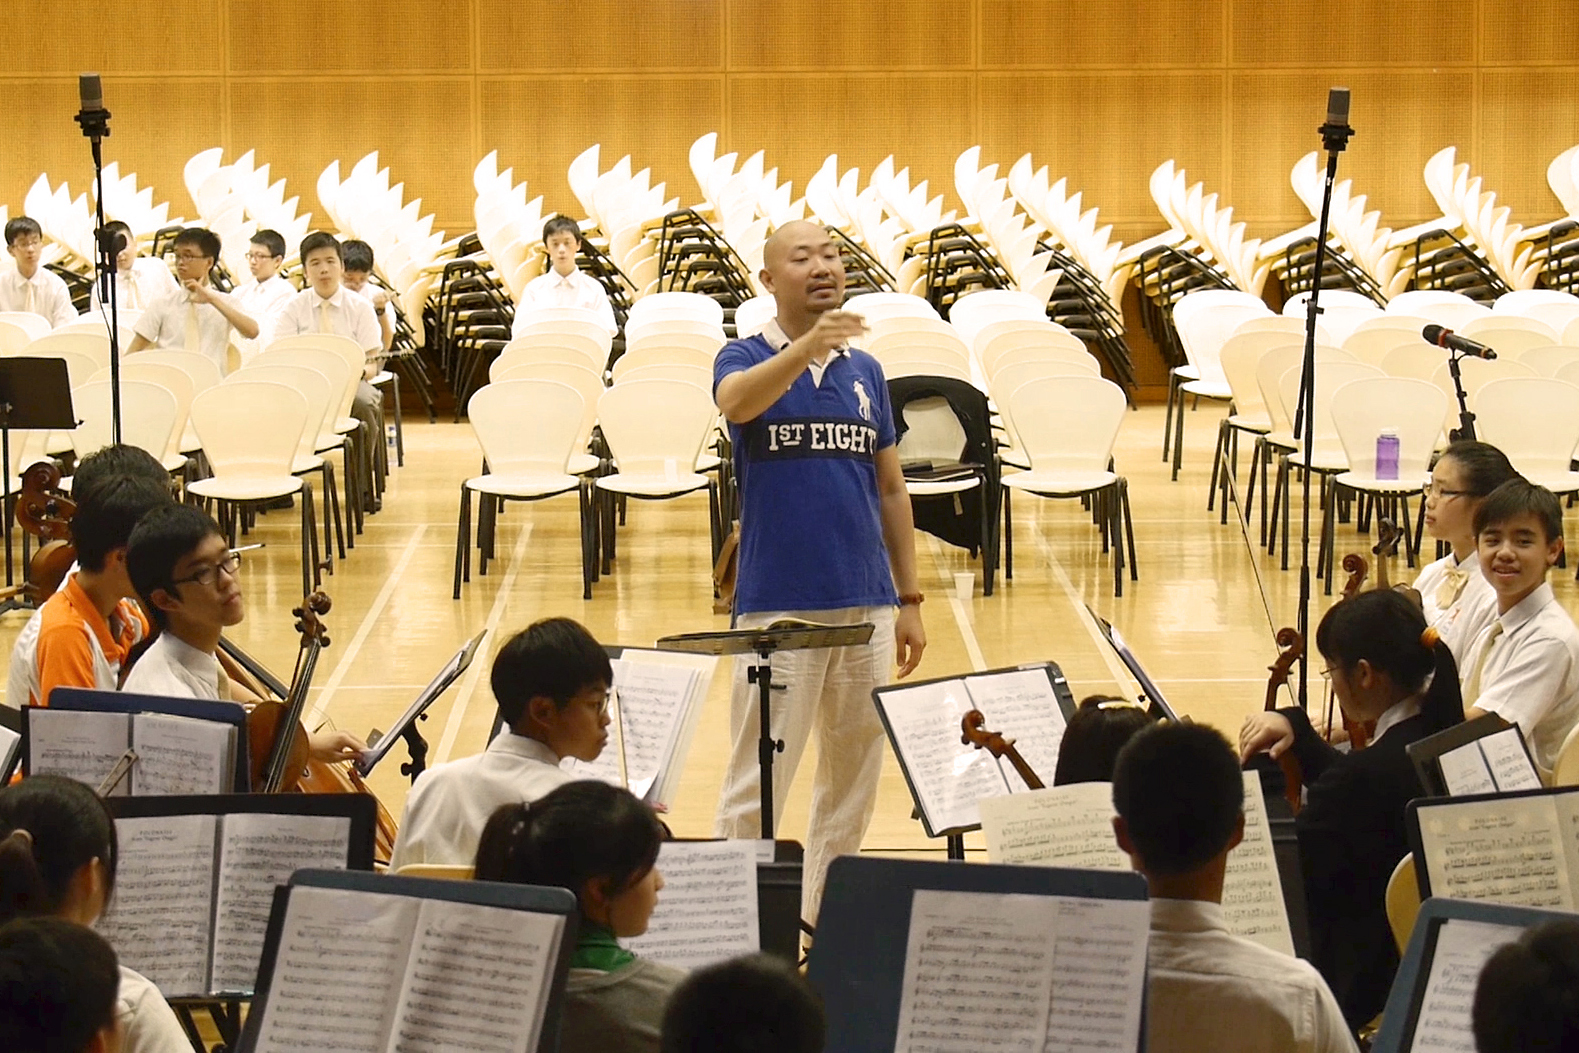 Mr. Chiang instructing our orchestra members